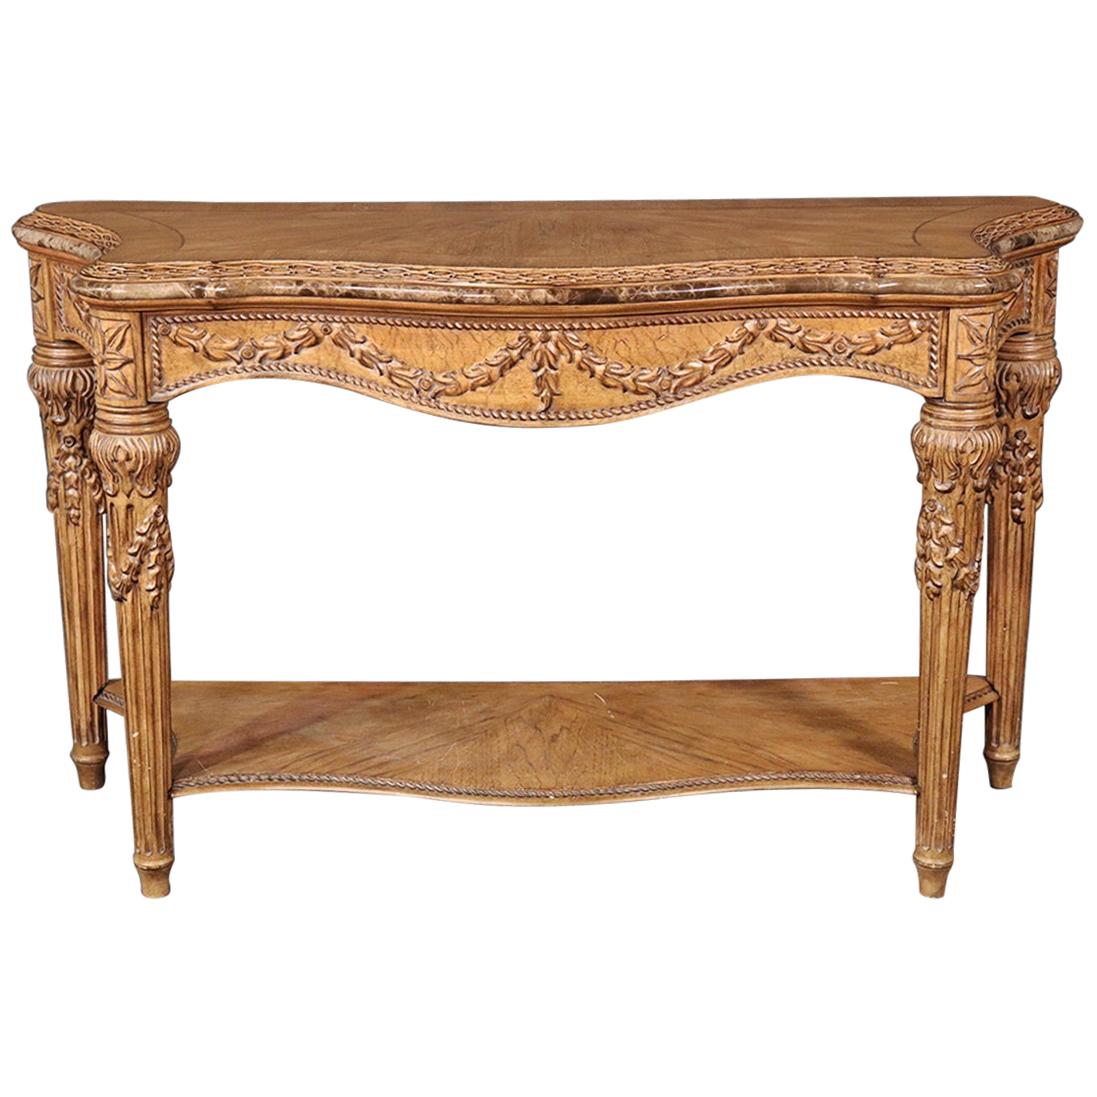 French Louis XVI Style Walnut Marble Trimmed Console Table